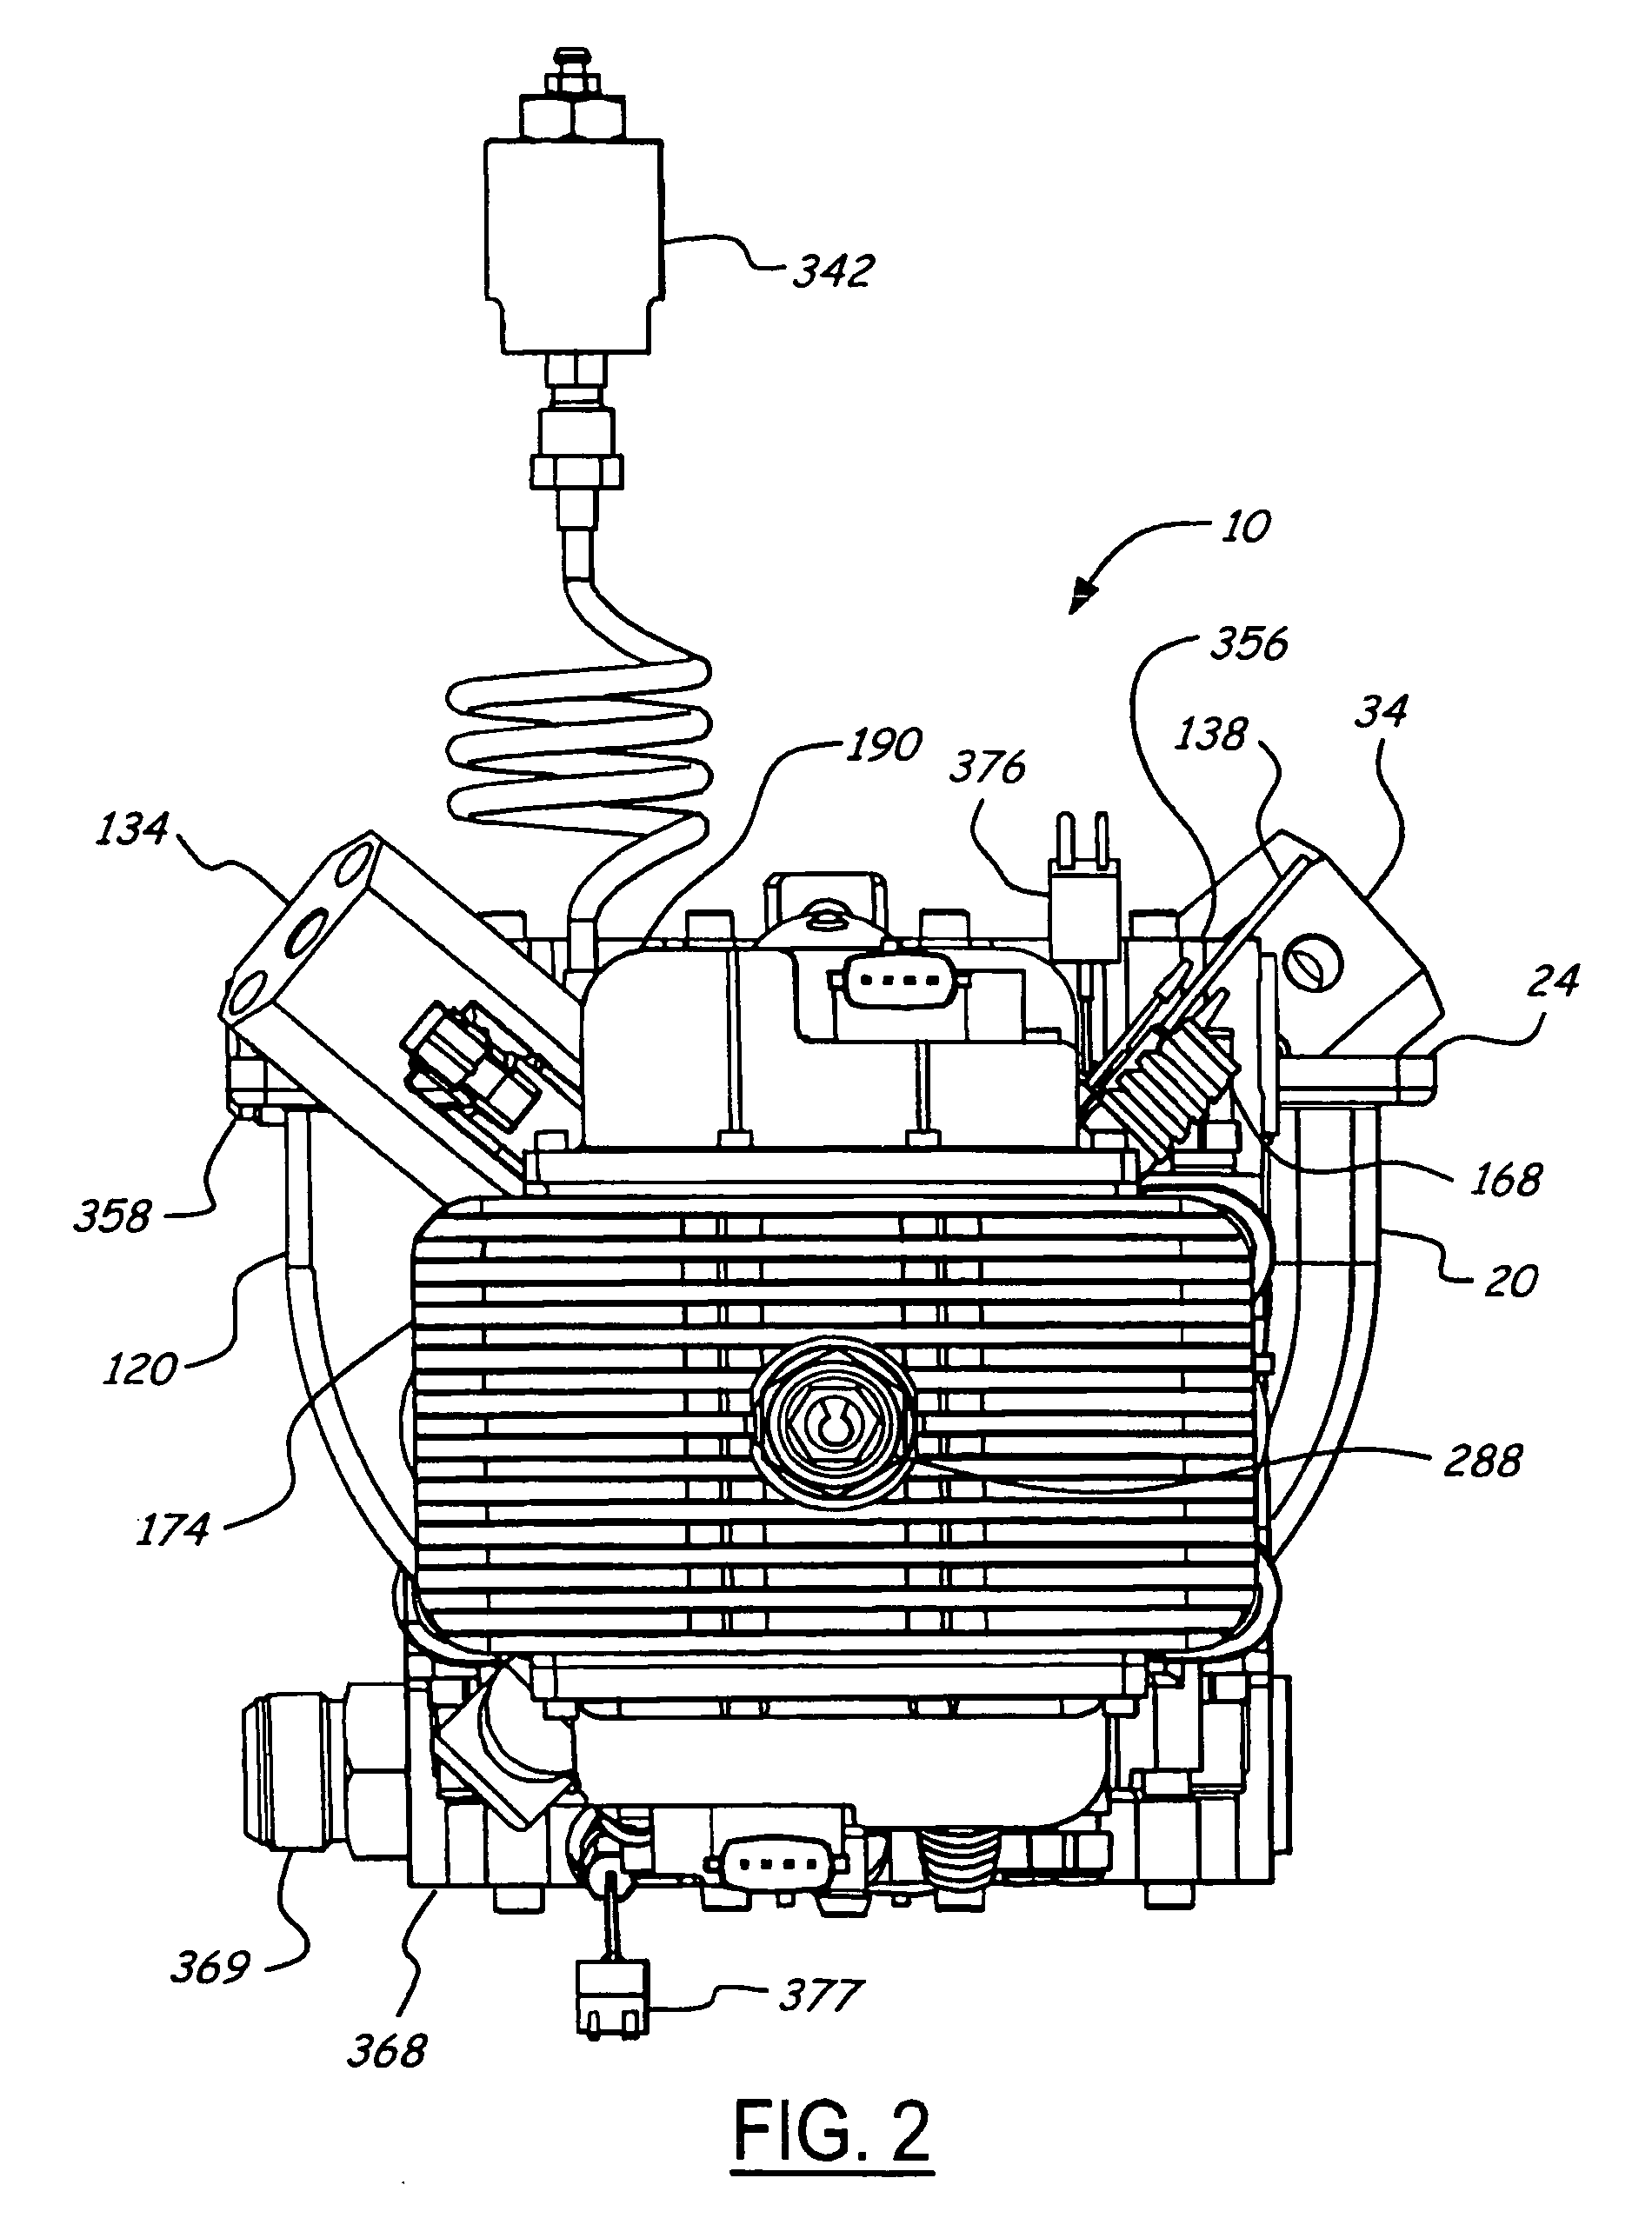 Position sensing for a free piston engine